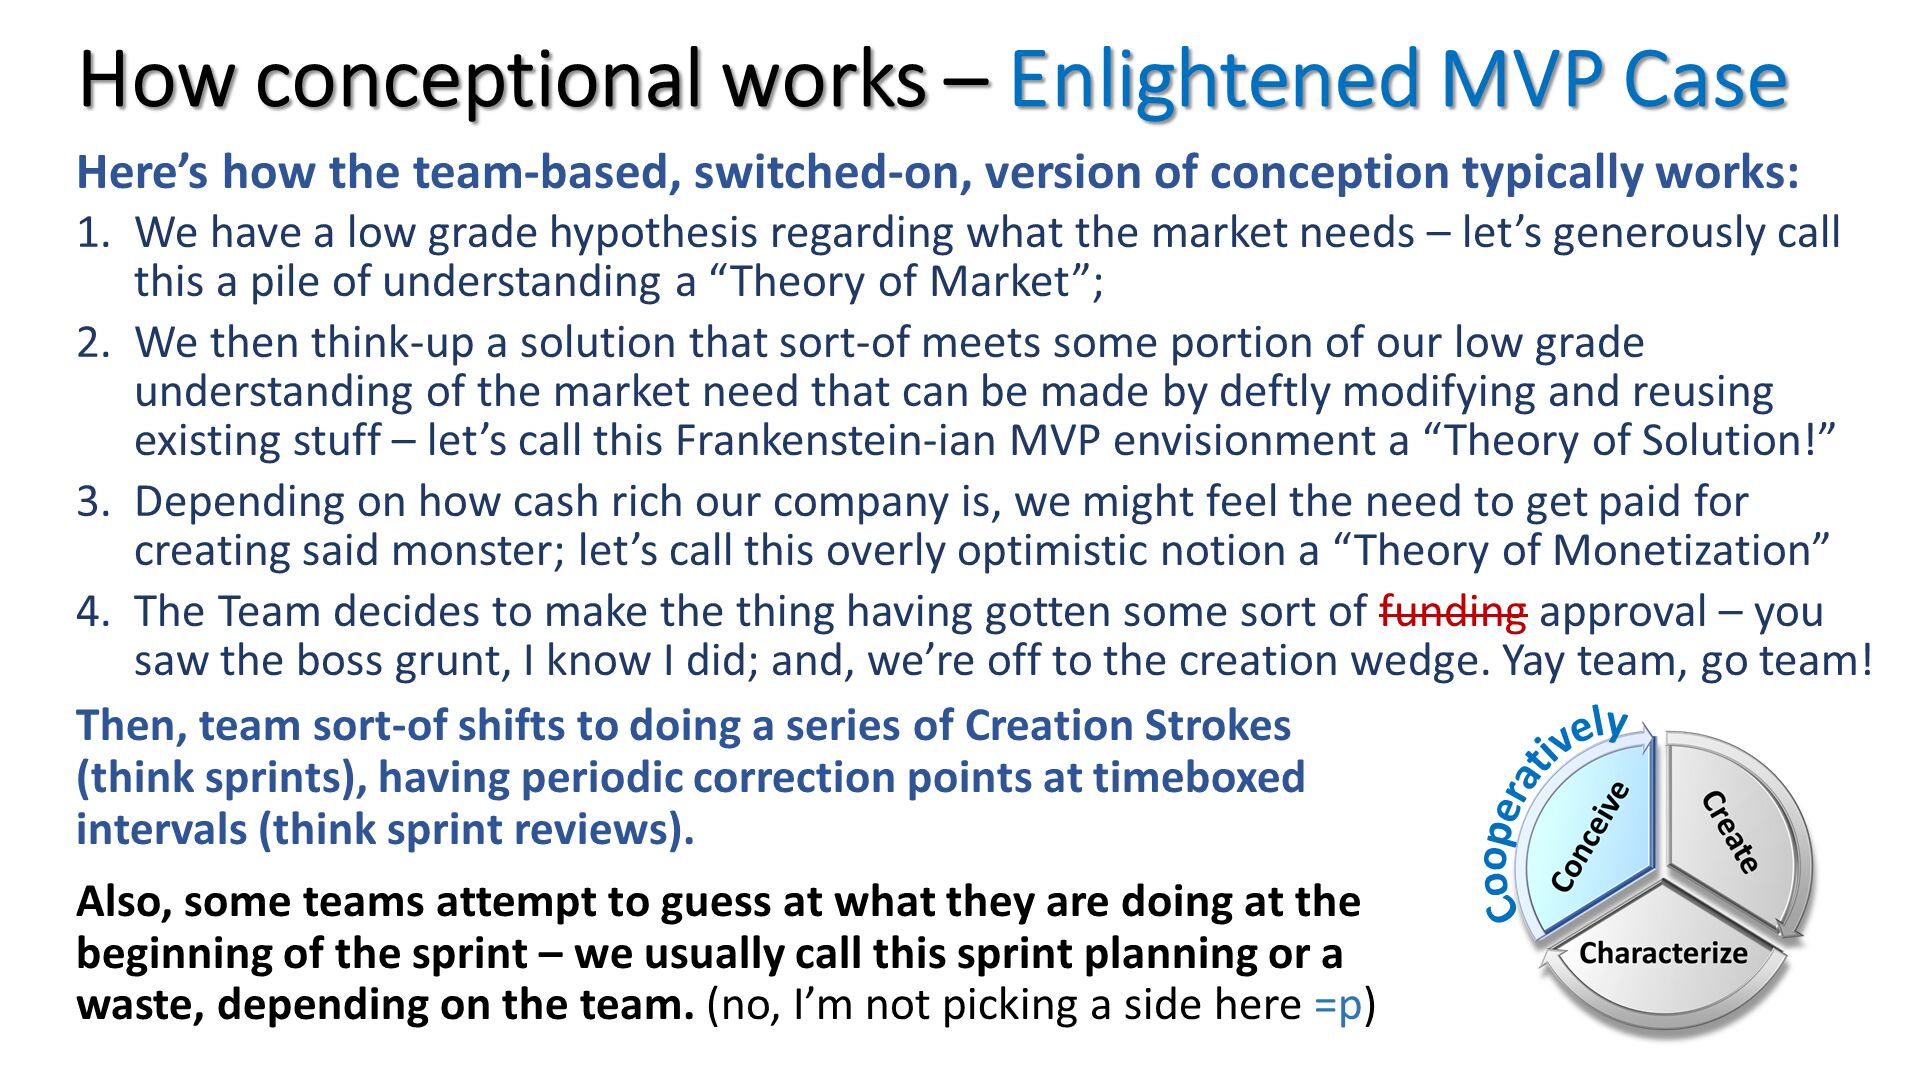 How conceptional works – Enlightened MVP Case. Here’s how the team-based, switched-on, version of conception typically works: 
We have a low grade hypothesis regarding what the market needs – let’s generously call this a pile of understanding a “Theory of Market”;
We then think-up a solution that sort-of meets some portion of our low grade understanding of the market need that can be made by deftly modifying and reusing existing stuff – let’s call this Frankenstein-ian MVP envisionment a “Theory of Solution!”
Depending on how cash rich our company is, we might feel the need to get paid for creating said monster; let’s call this overly optimistic notion a “Theory of Monetization”
The Team decides to make the thing having gotten some sort of funding approval – you saw the boss grunt, I know I did; and, we’re off to the creation wedge. Yay team, go team!. Then, team sort-of shifts to doing a series of Creation Strokes (think sprints), having periodic correction points at timeboxed intervals (think sprint reviews).
Also, some teams attempt to guess at what they are doing at the beginning of the sprint – we usually call this sprint planning or a waste, depending on the team. (no, I’m not picking a side here =p). 